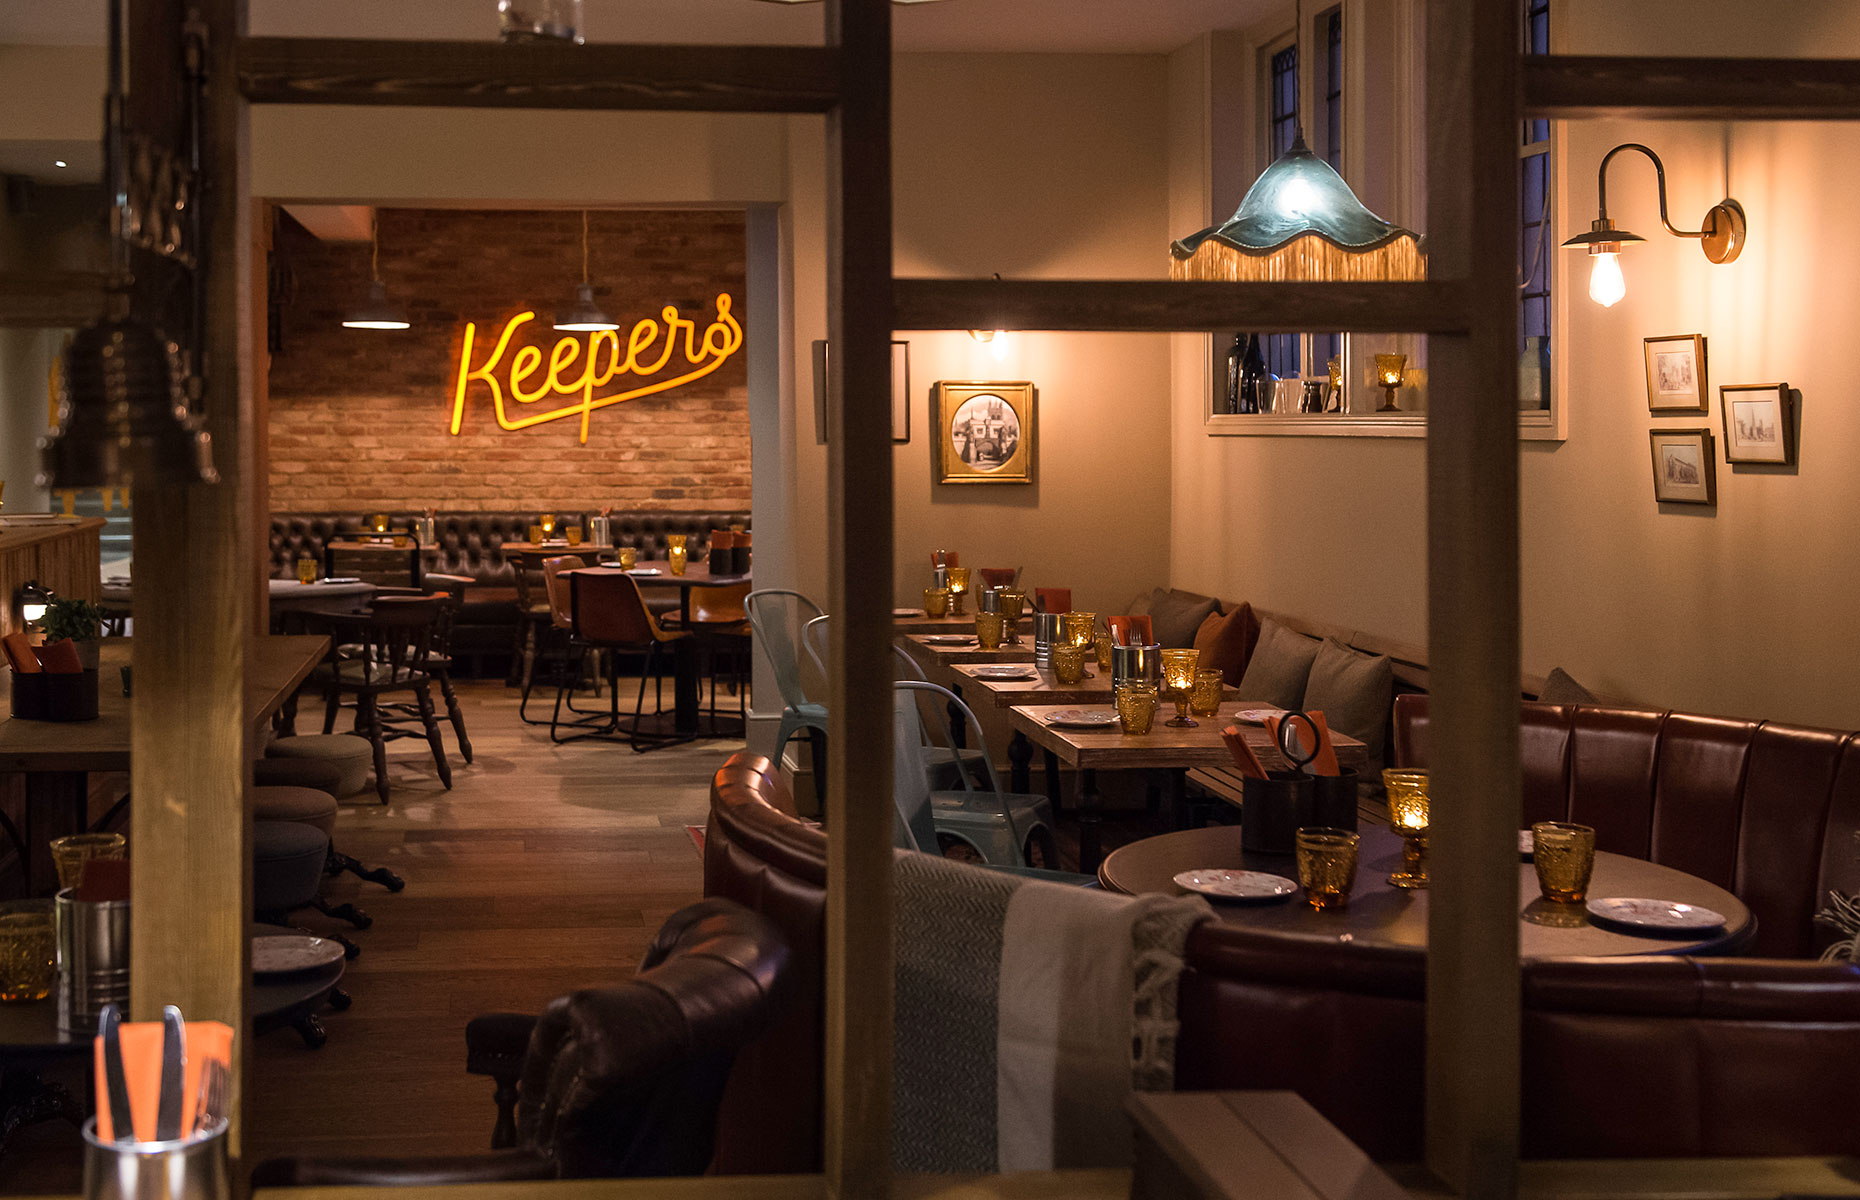 keepers kitchen and bar london london ec3n 2nr